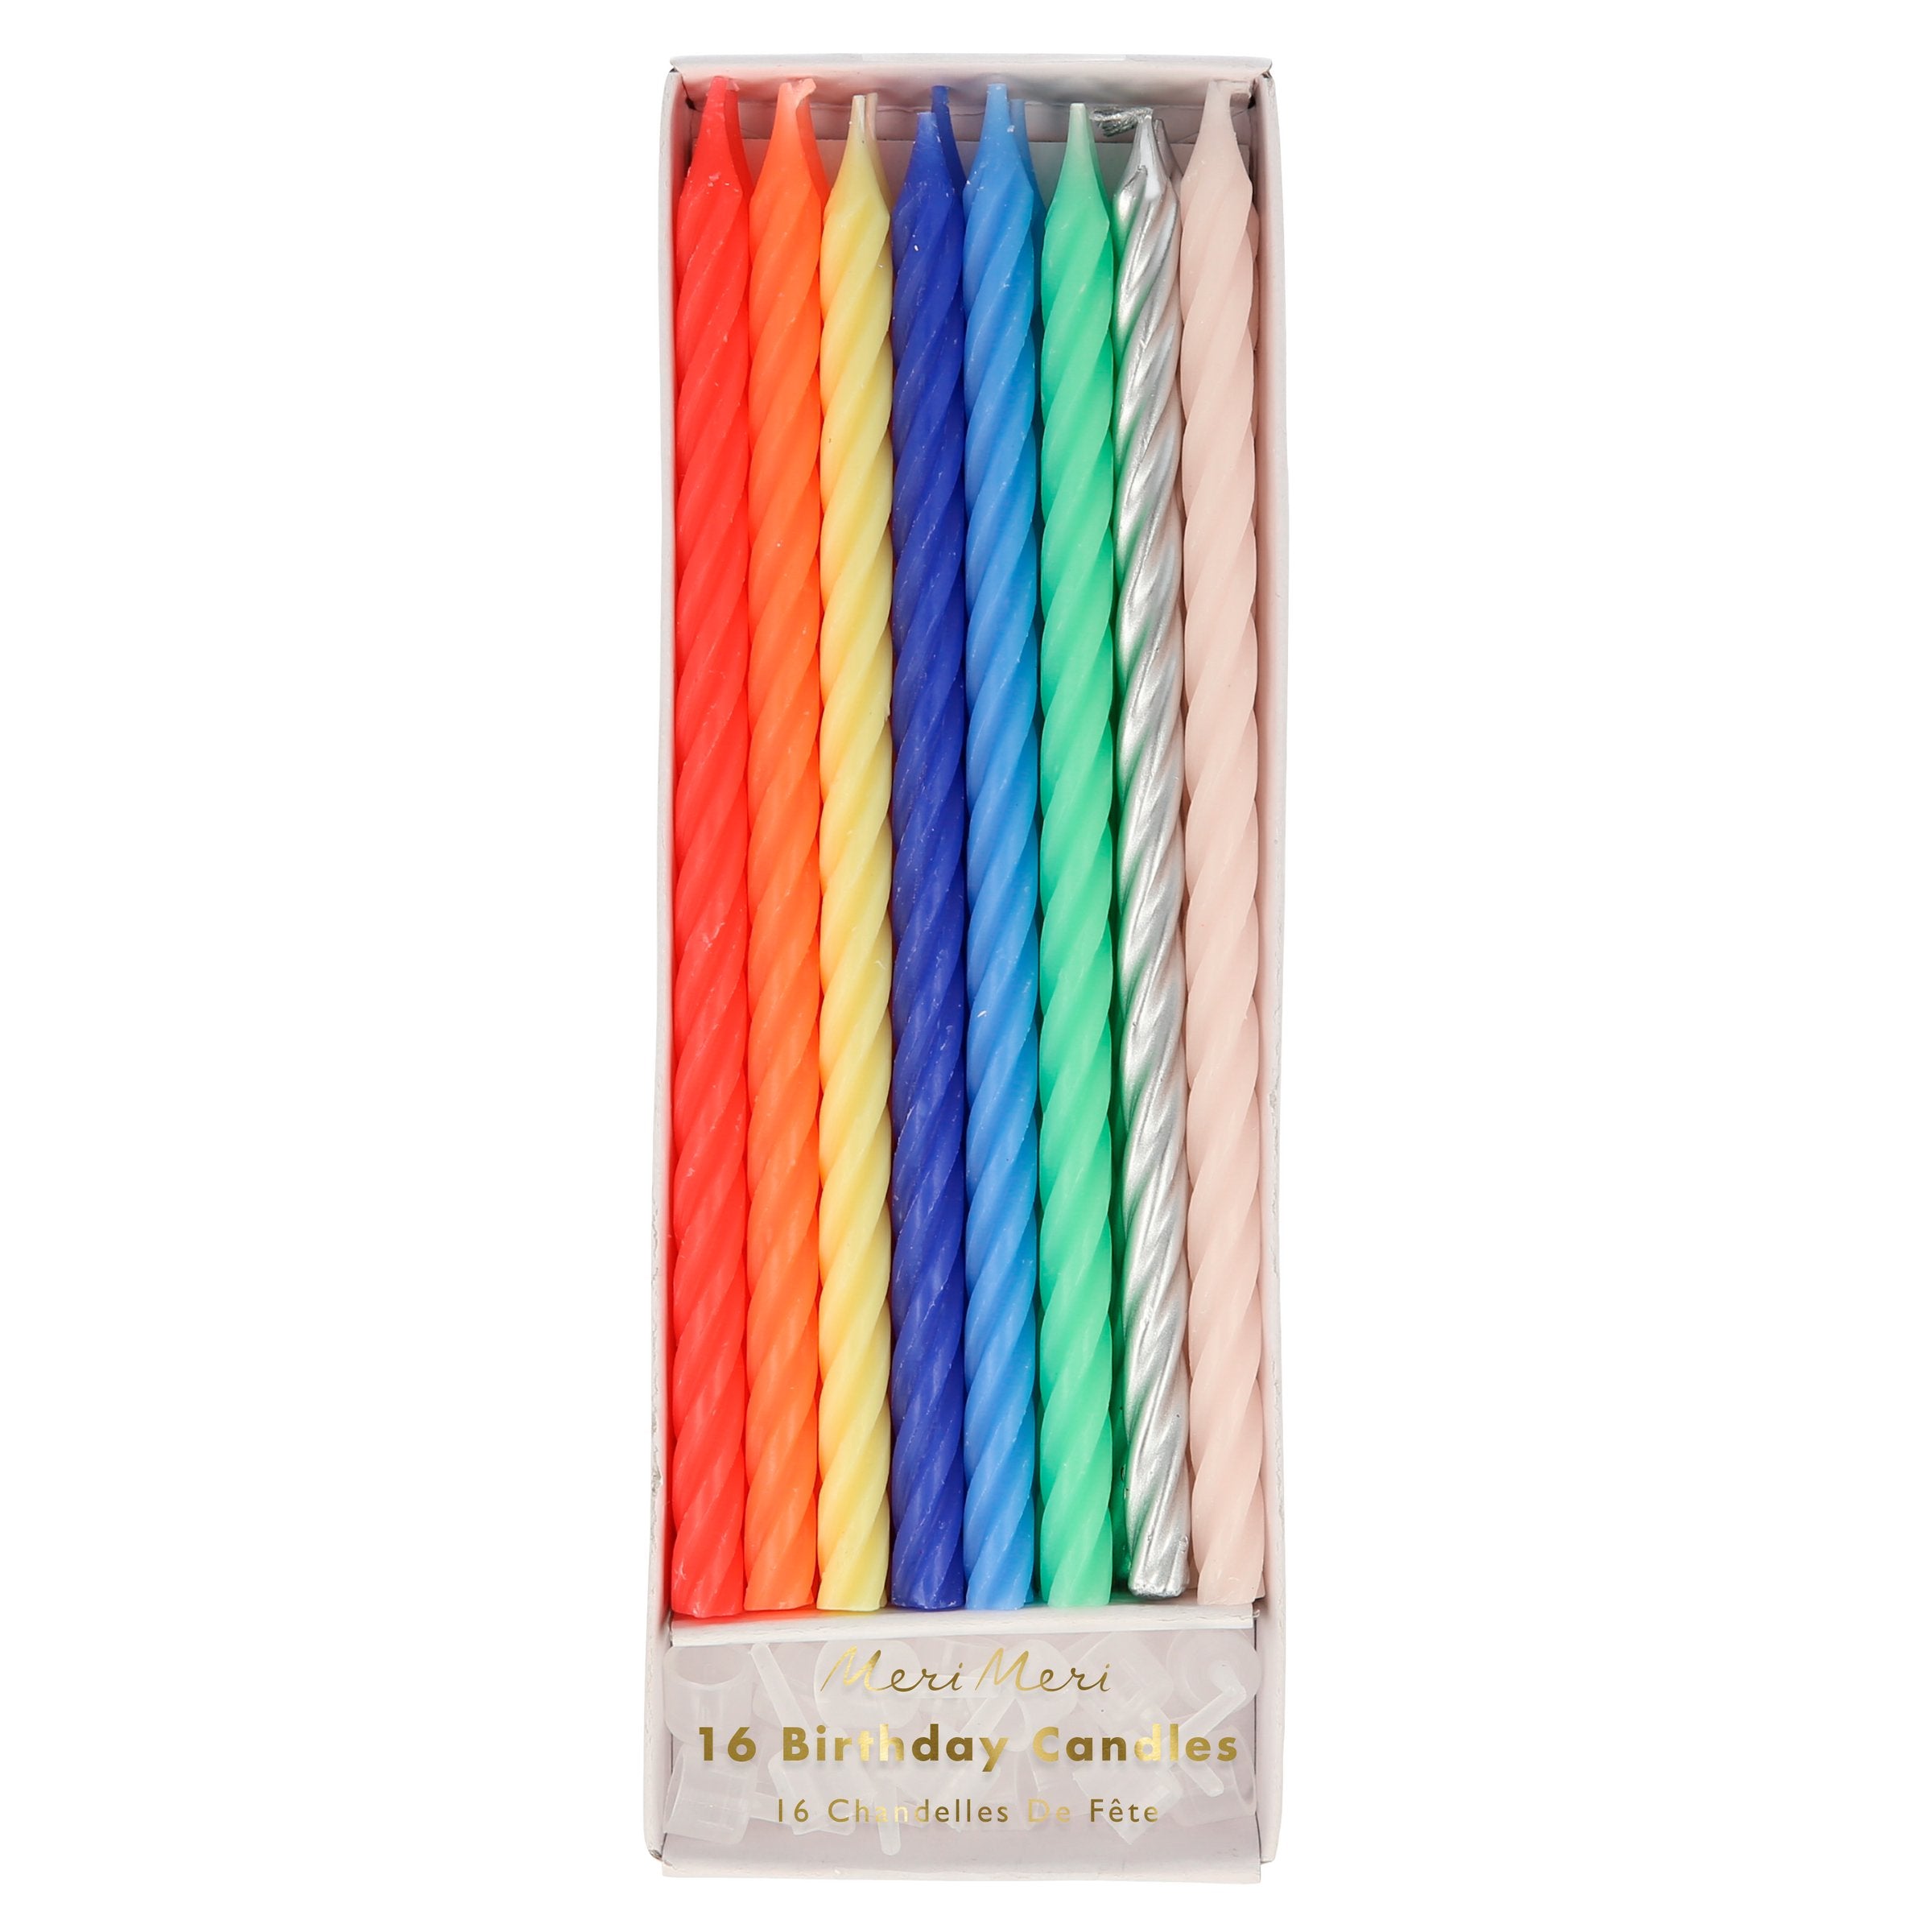 These bright neon candles, with a twisted effect, will look on your party cake.